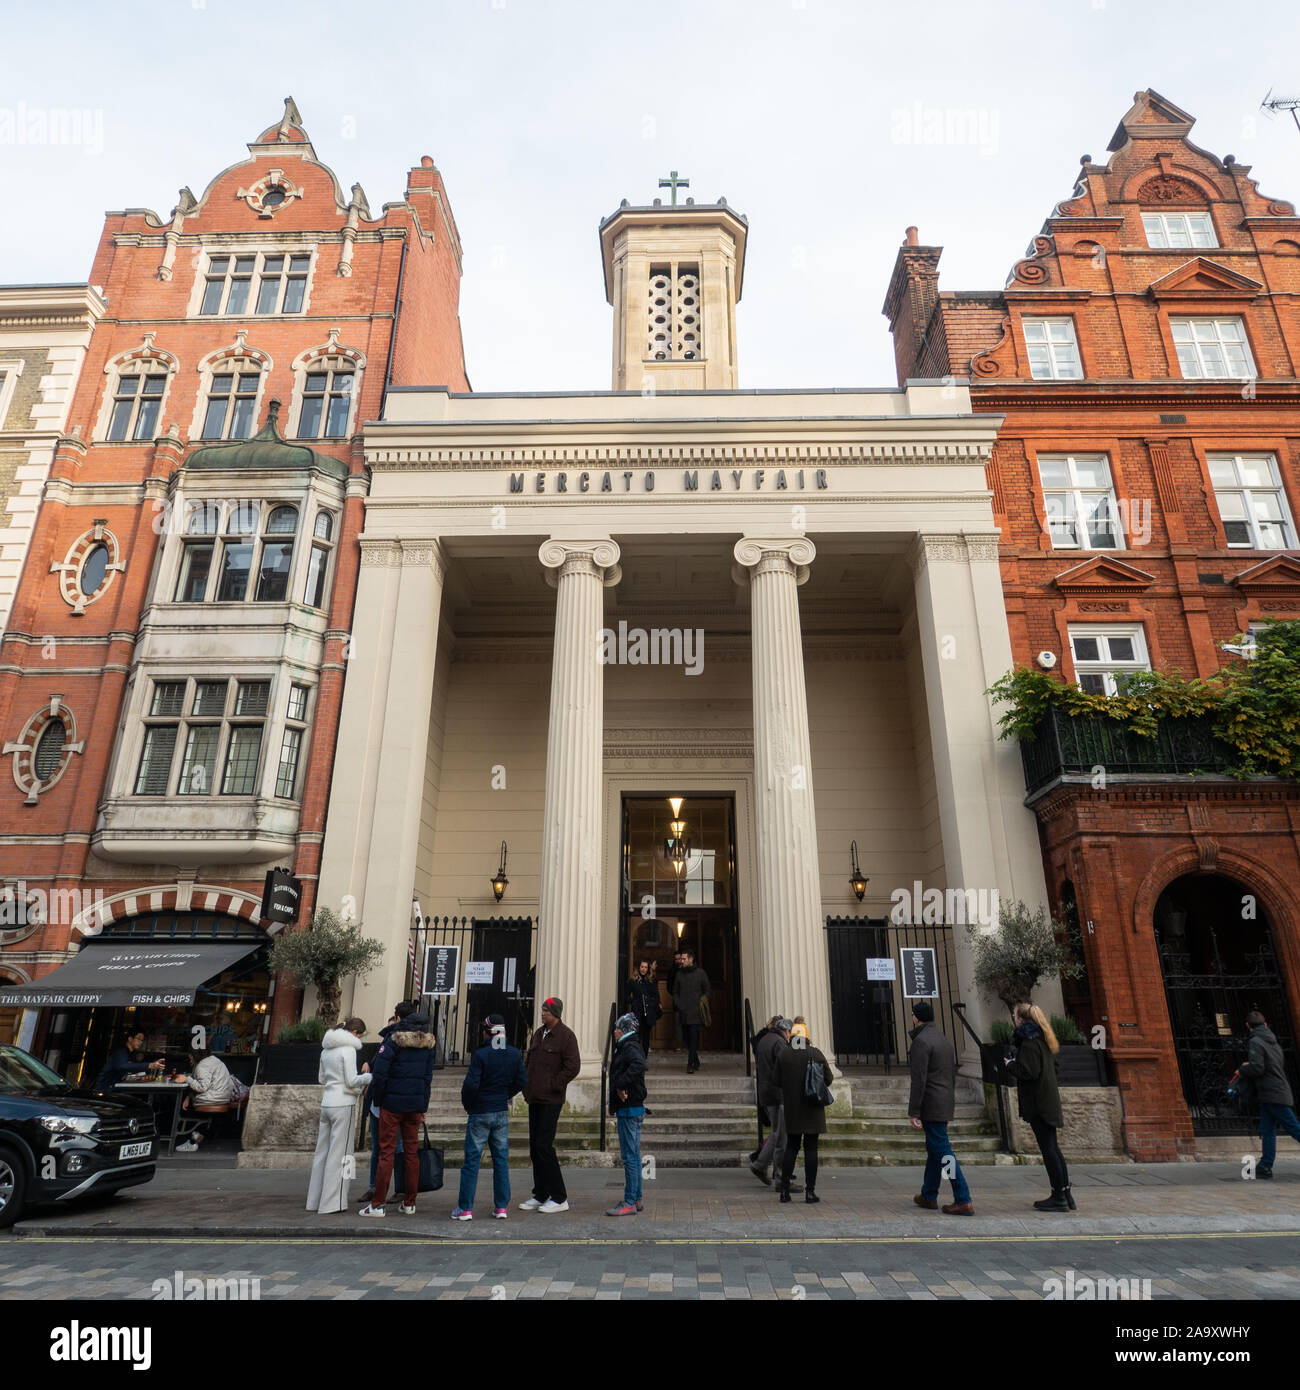 Mercato Mayfair, a food hall and market housed inside Grade 1 listed St Marks Church in N Audley street, Mayfair, London. Stock Photo